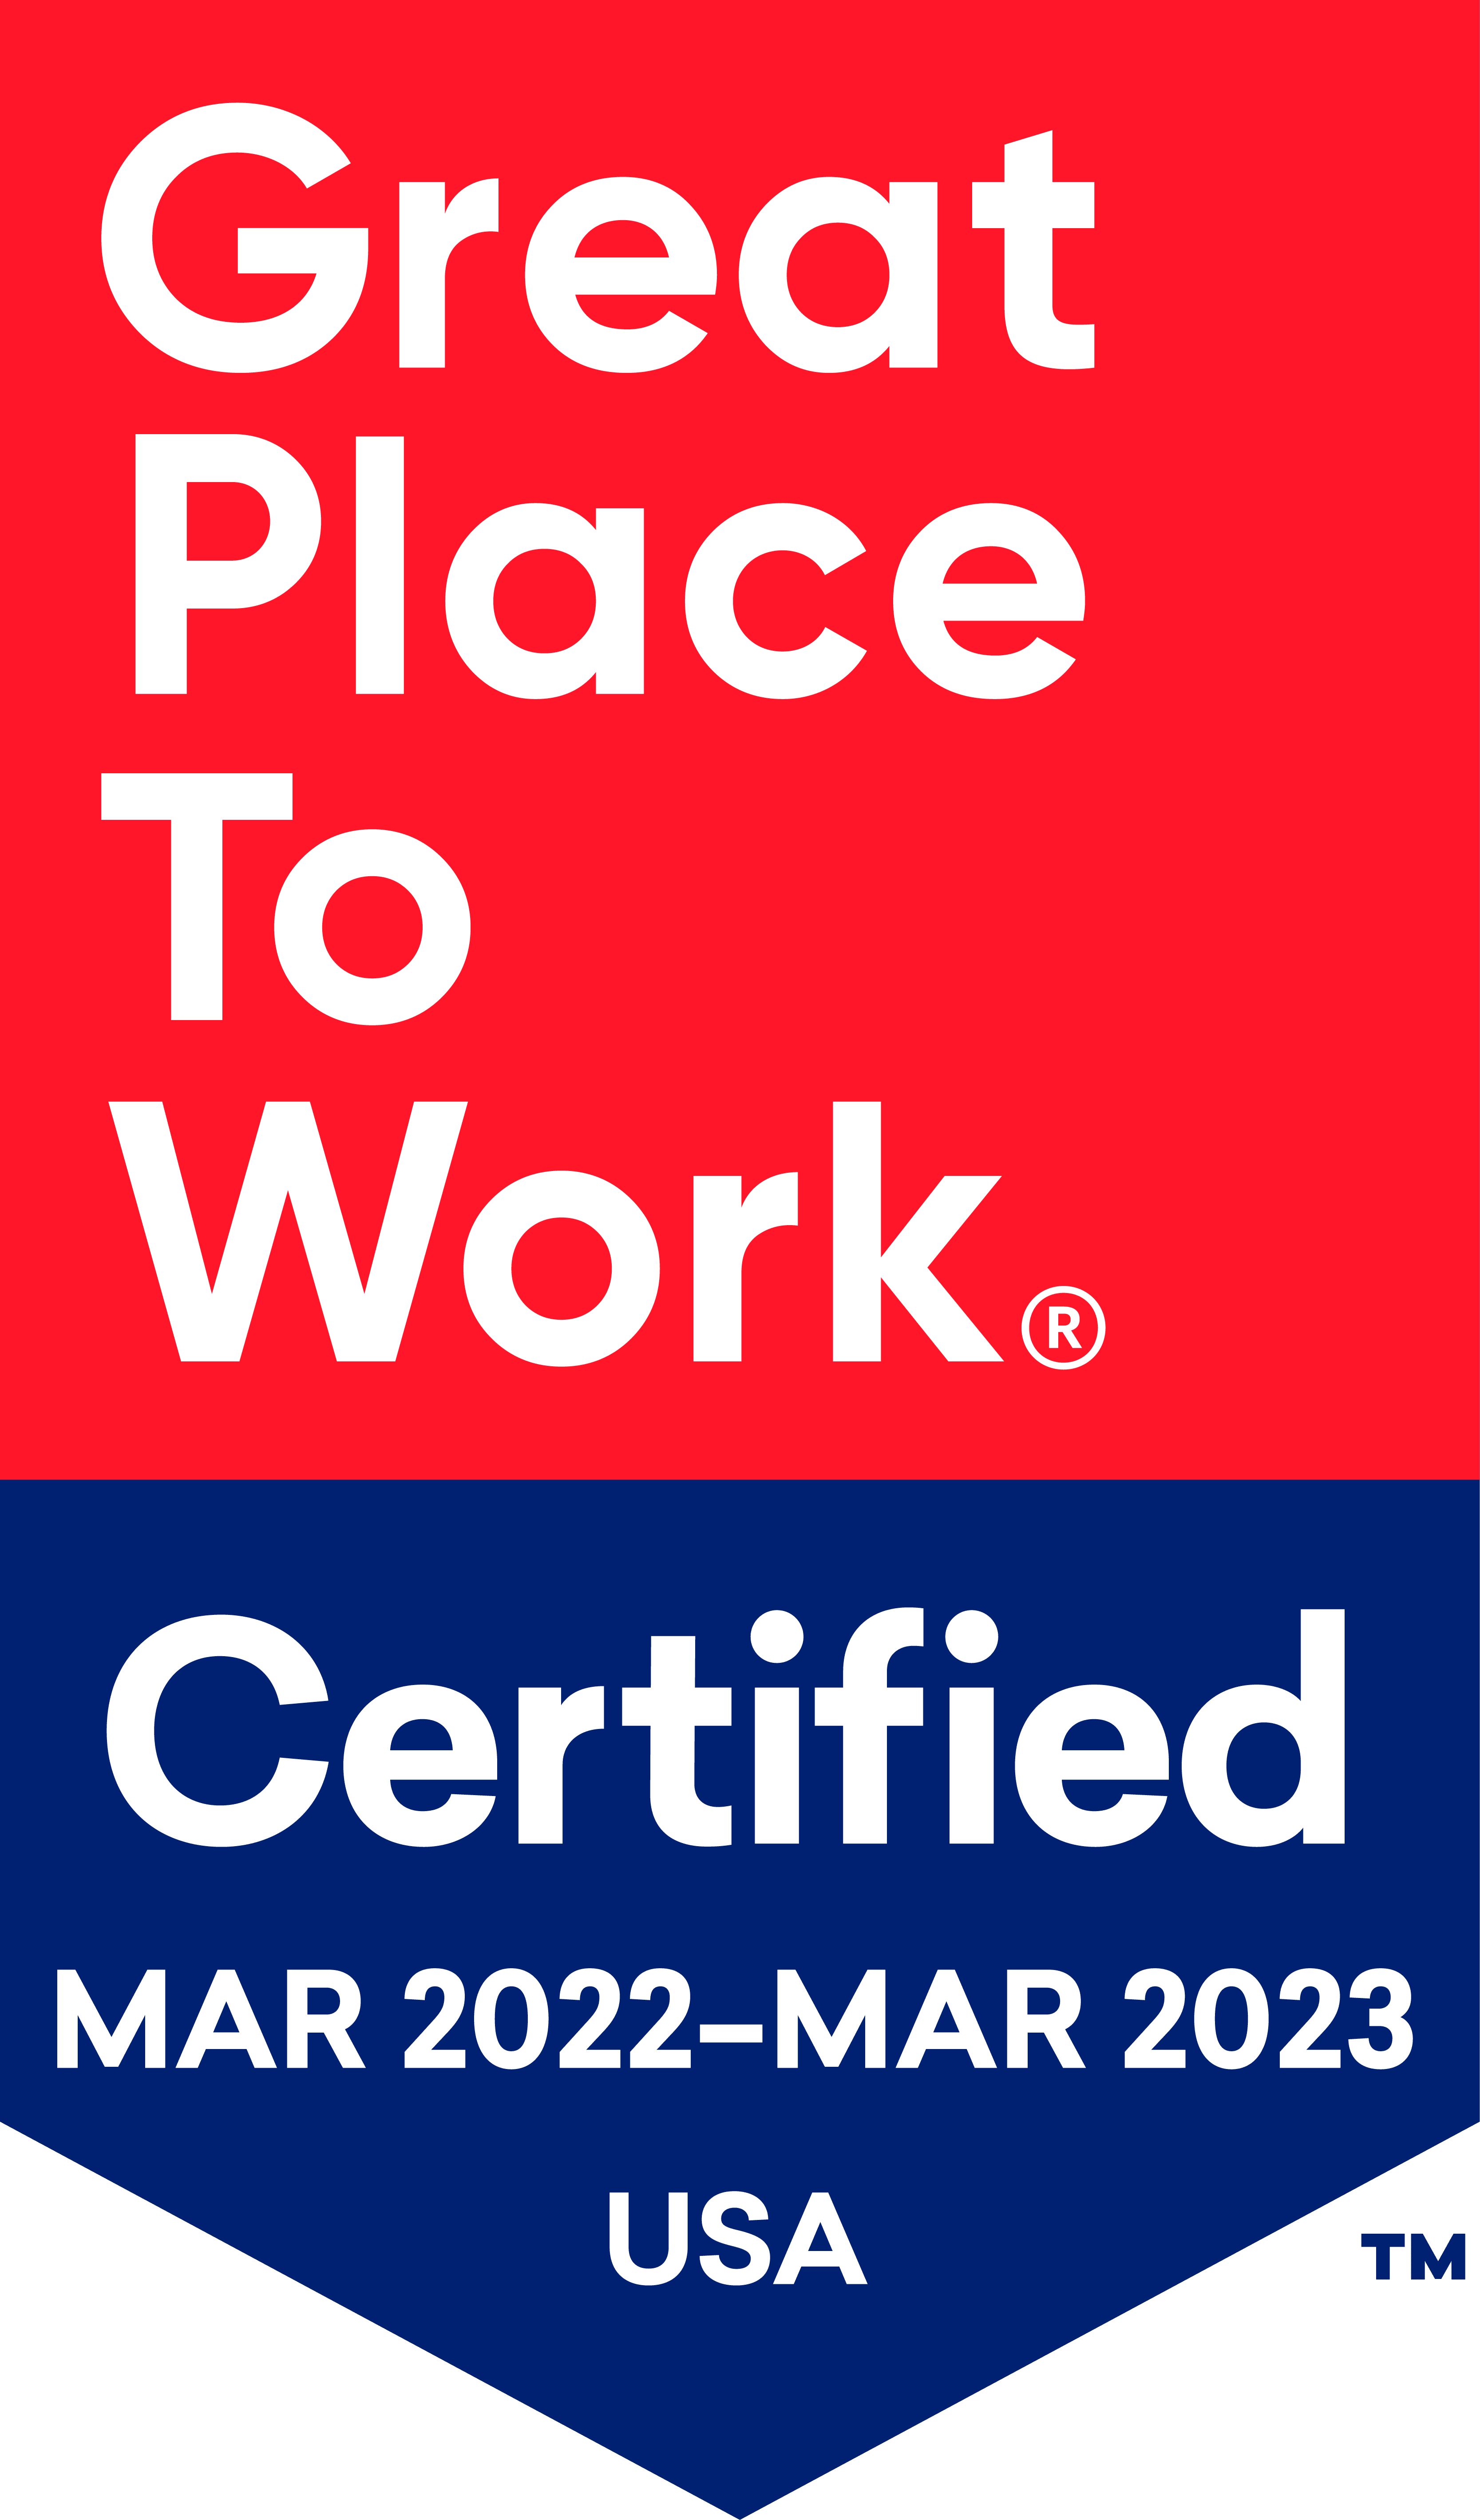 Great place to work badge for Keystone Place at Terra Bella